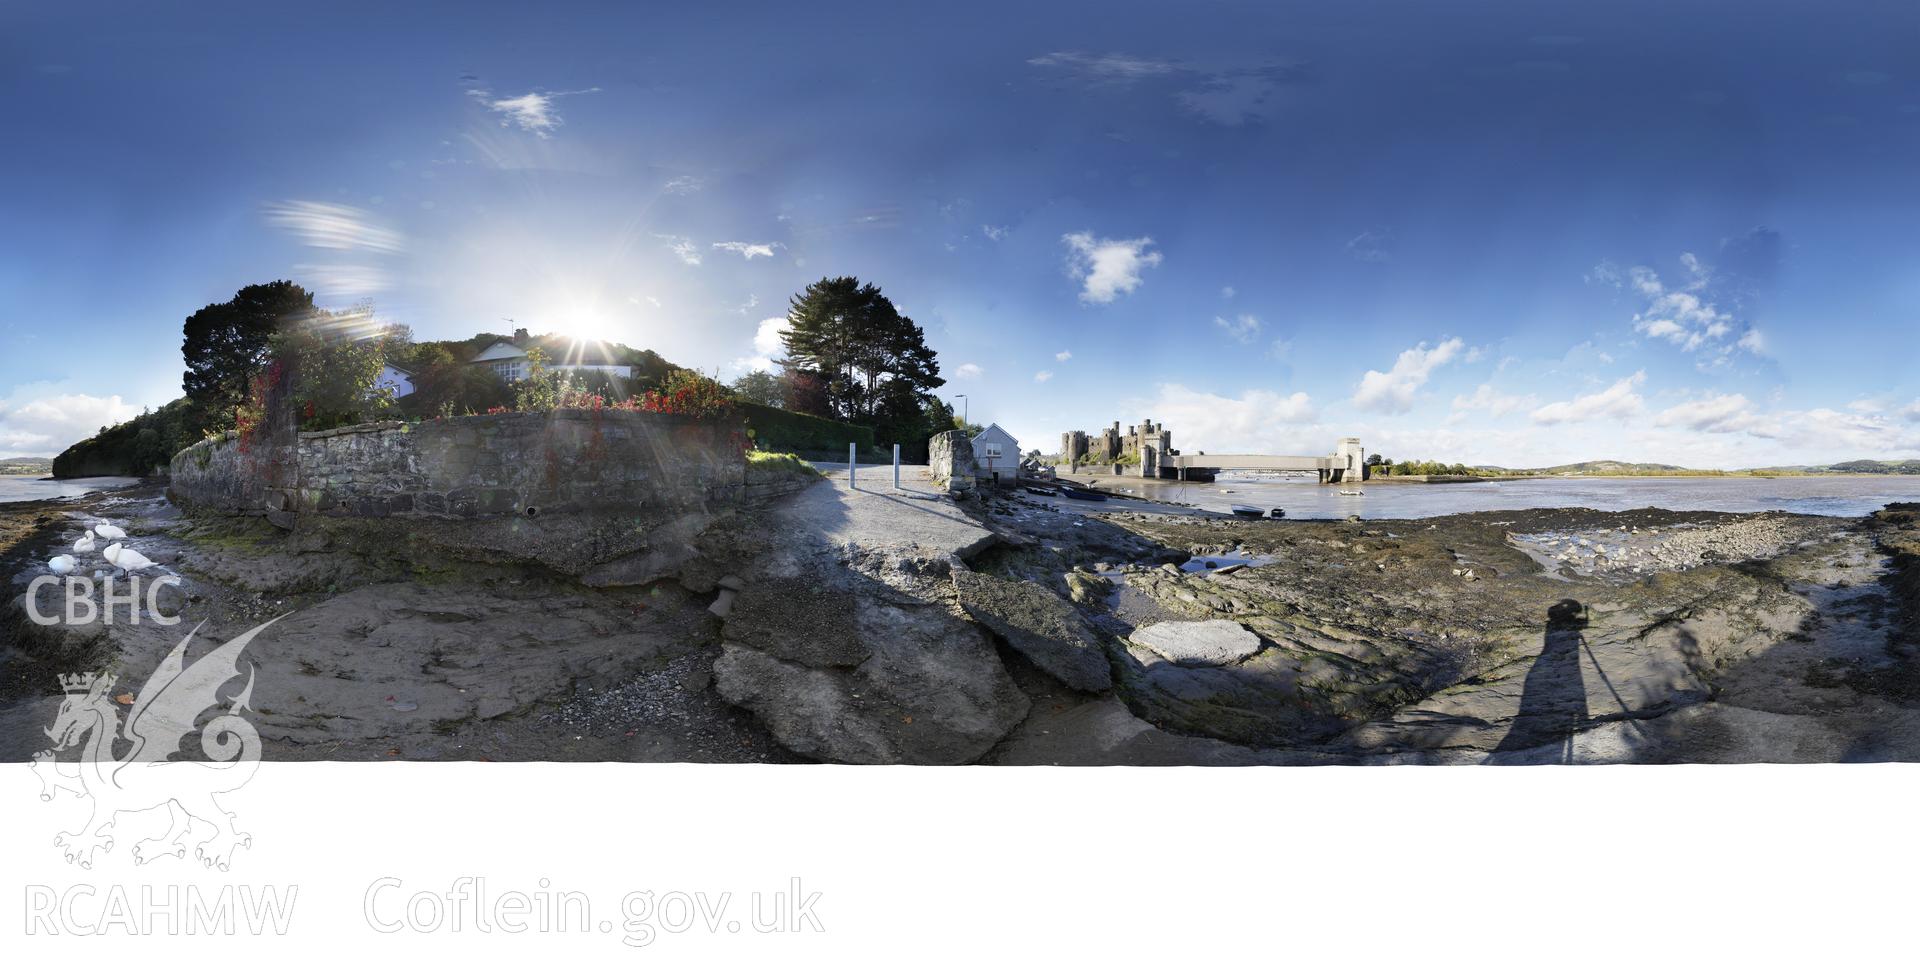 Reduced resolution Tif file of stitched images taken on the riverbank overlooking Conwy suspension Bridge, produced by Sue Fielding.